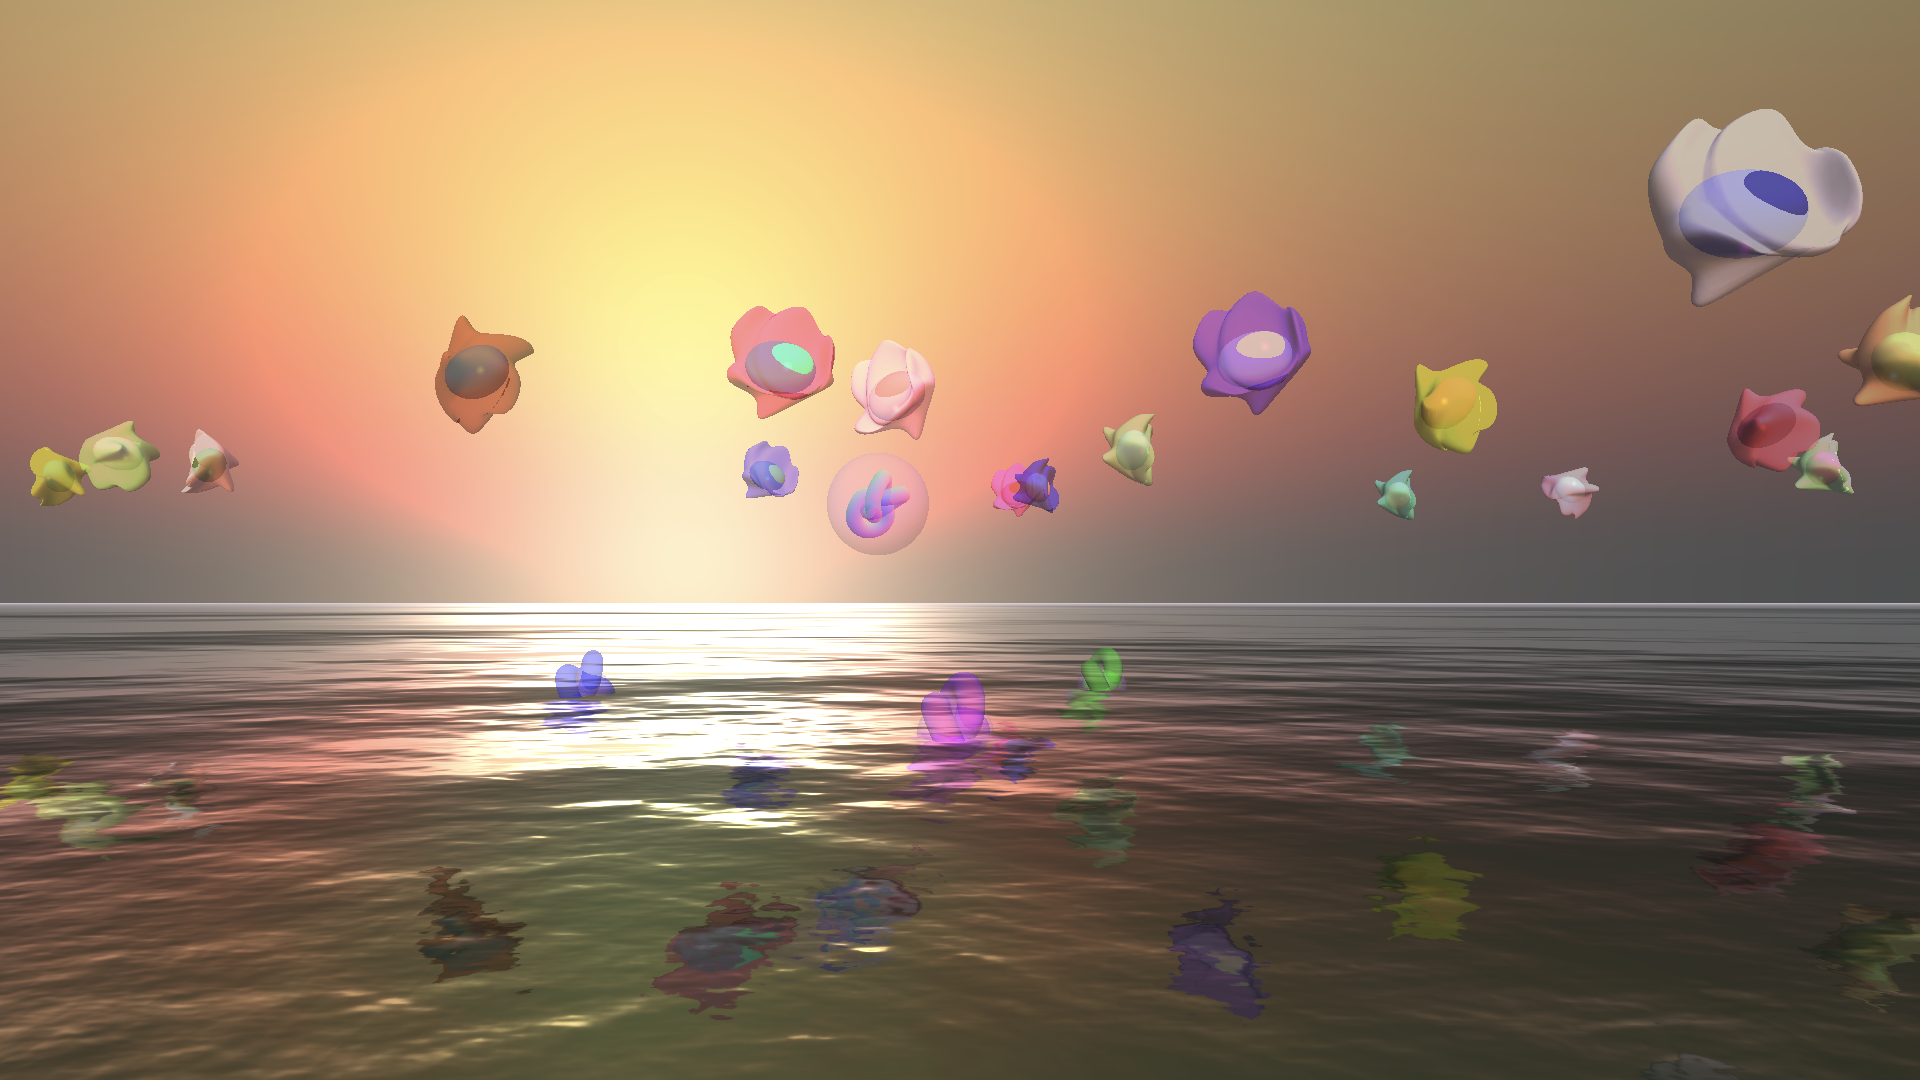 A dreamlike-pastel world with soft colourful shapes floating above an ocean